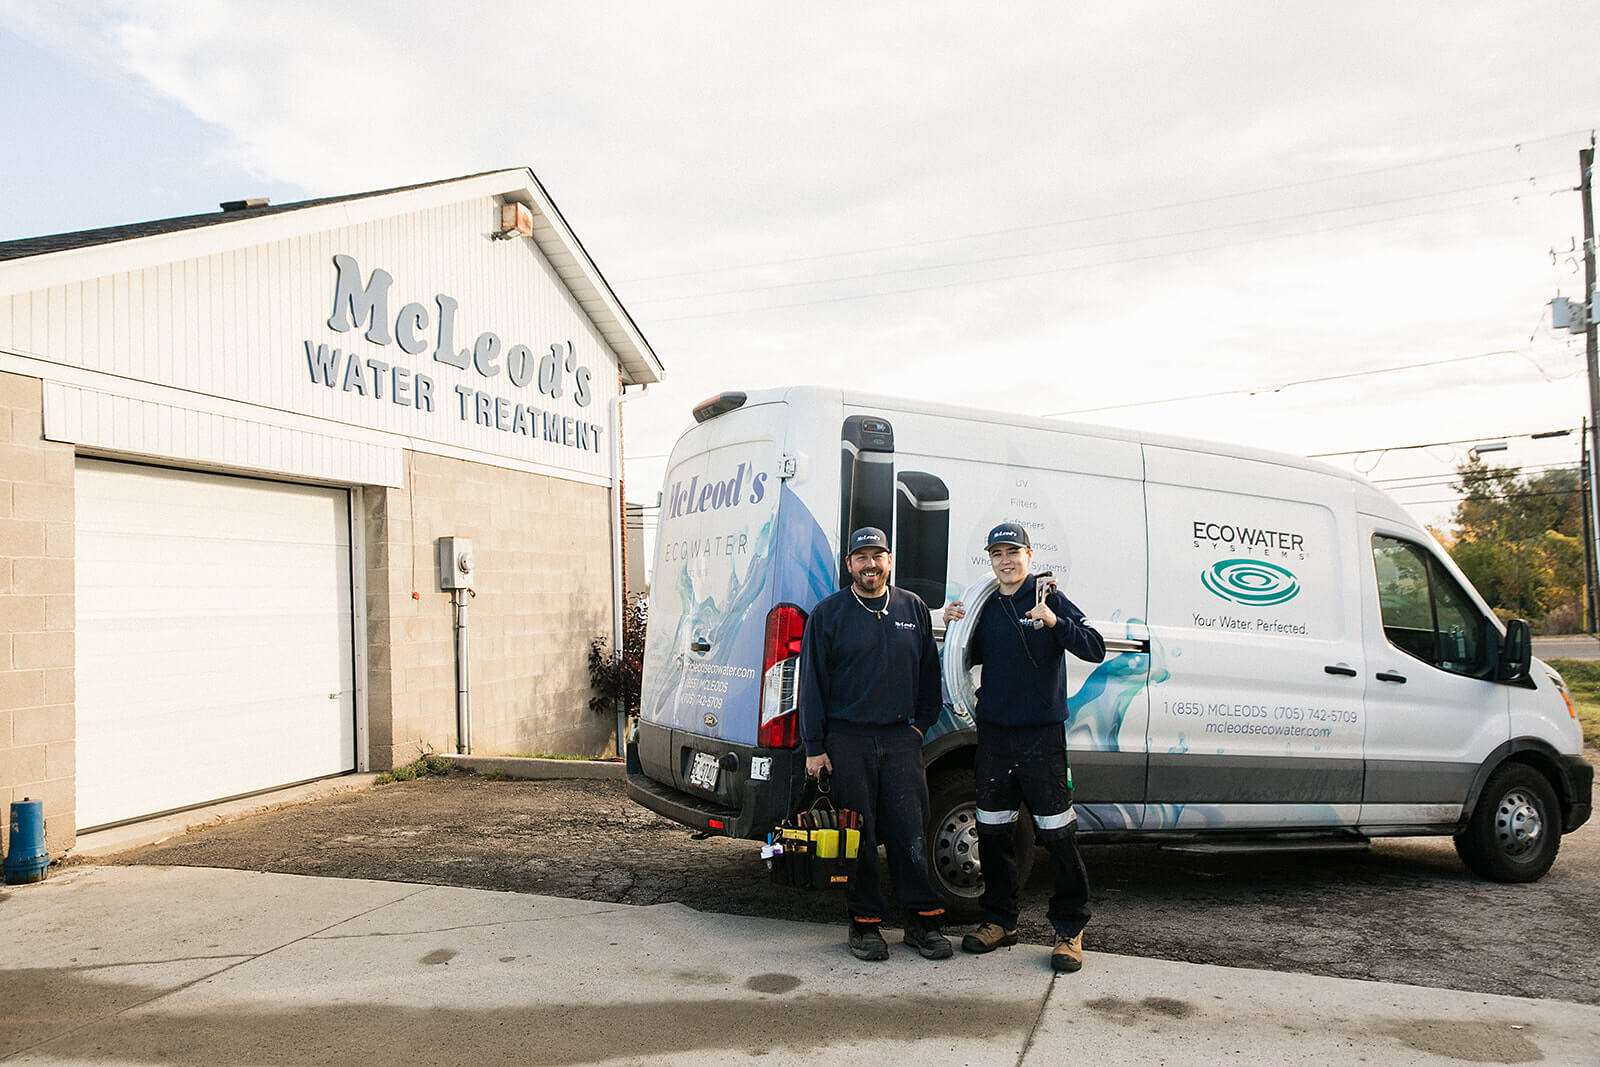 Ecowater service